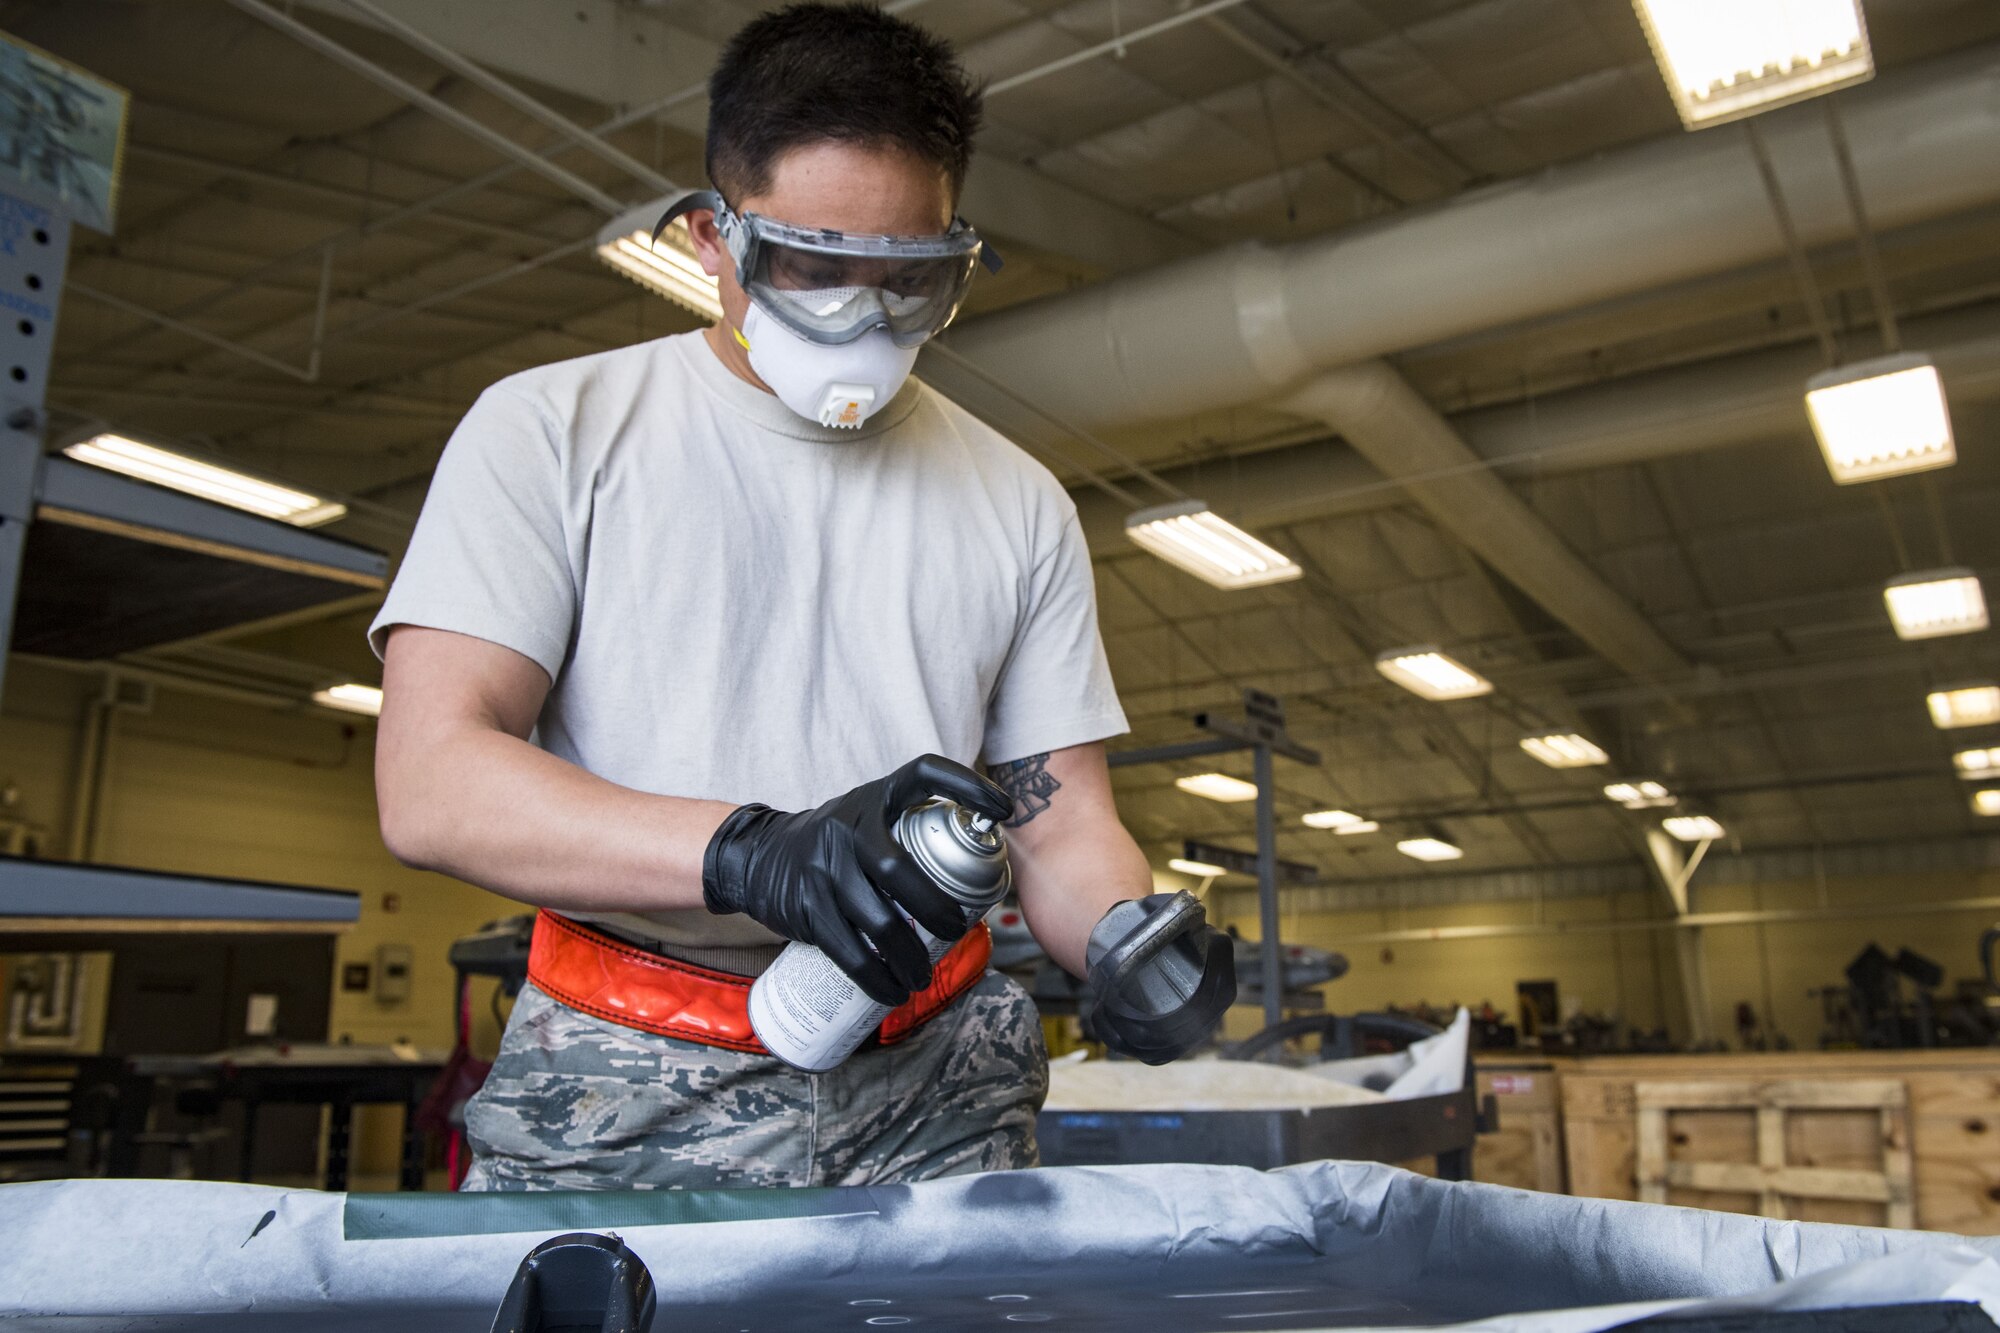 Airman 1st Class Vernon Datu, 23d Maintenance Squadron gun element member, paints metal elements with anti-corrosion spray, Jan. 10, 2018, at Moody Air Force Base, Ga. Moody’s armament flight is responsible for maintaining all of the aircraft weapons systems components when they're removed from the aircraft. This includes gun systems, alternate mission equipment and bomb racks. (U.S. Air Force photo by Senior Airman Janiqua P. Robinson)